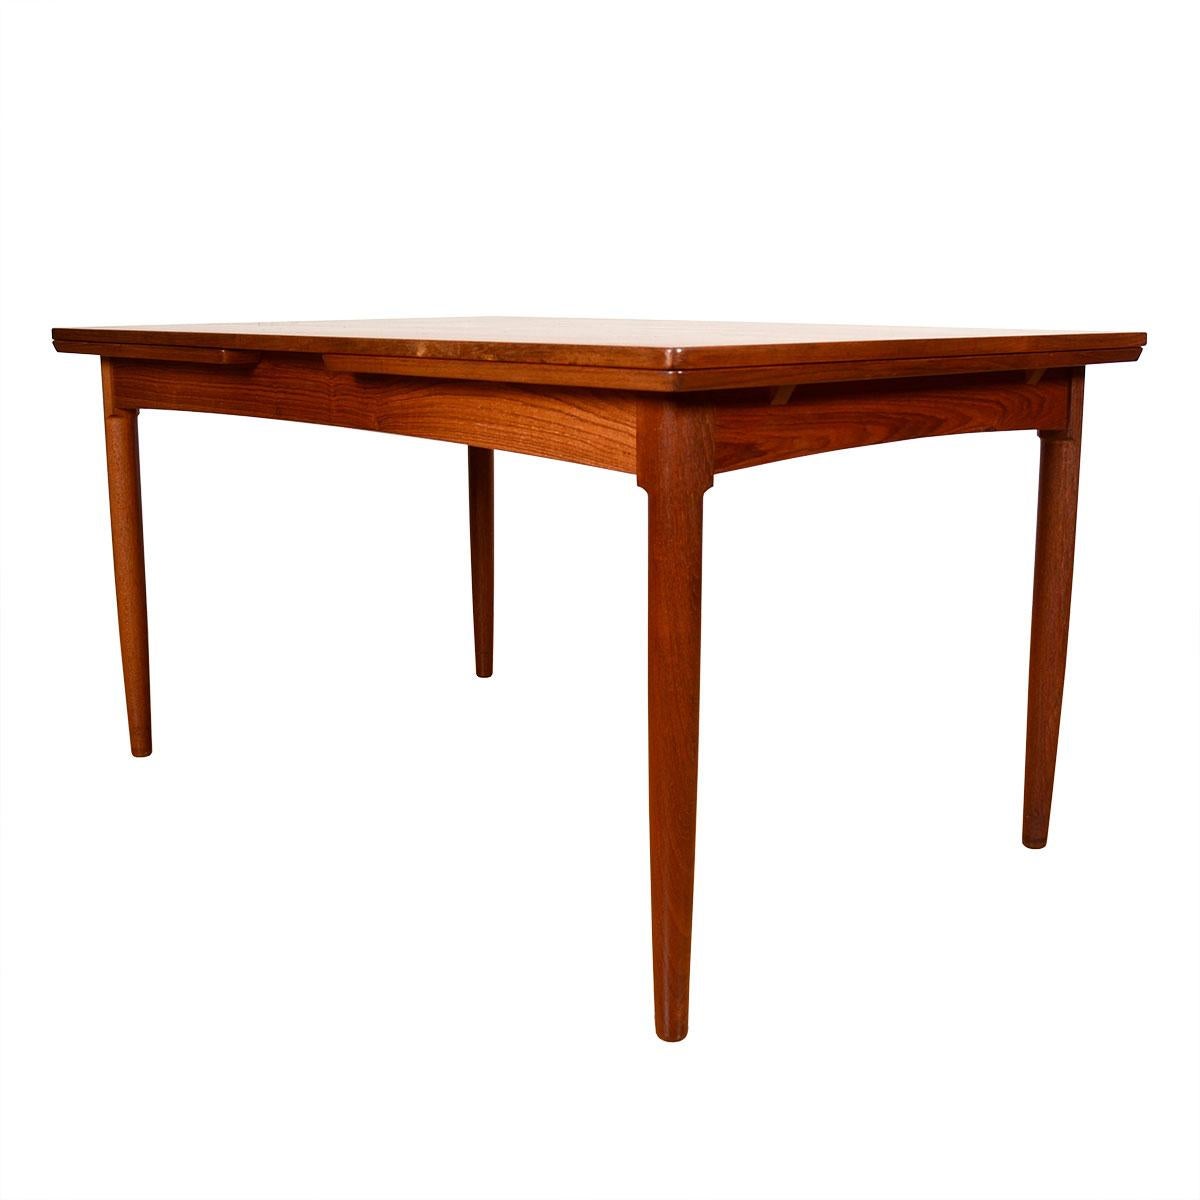 20th Century Teak Expanding Danish Modern Mid-Sized Dining Table For Sale